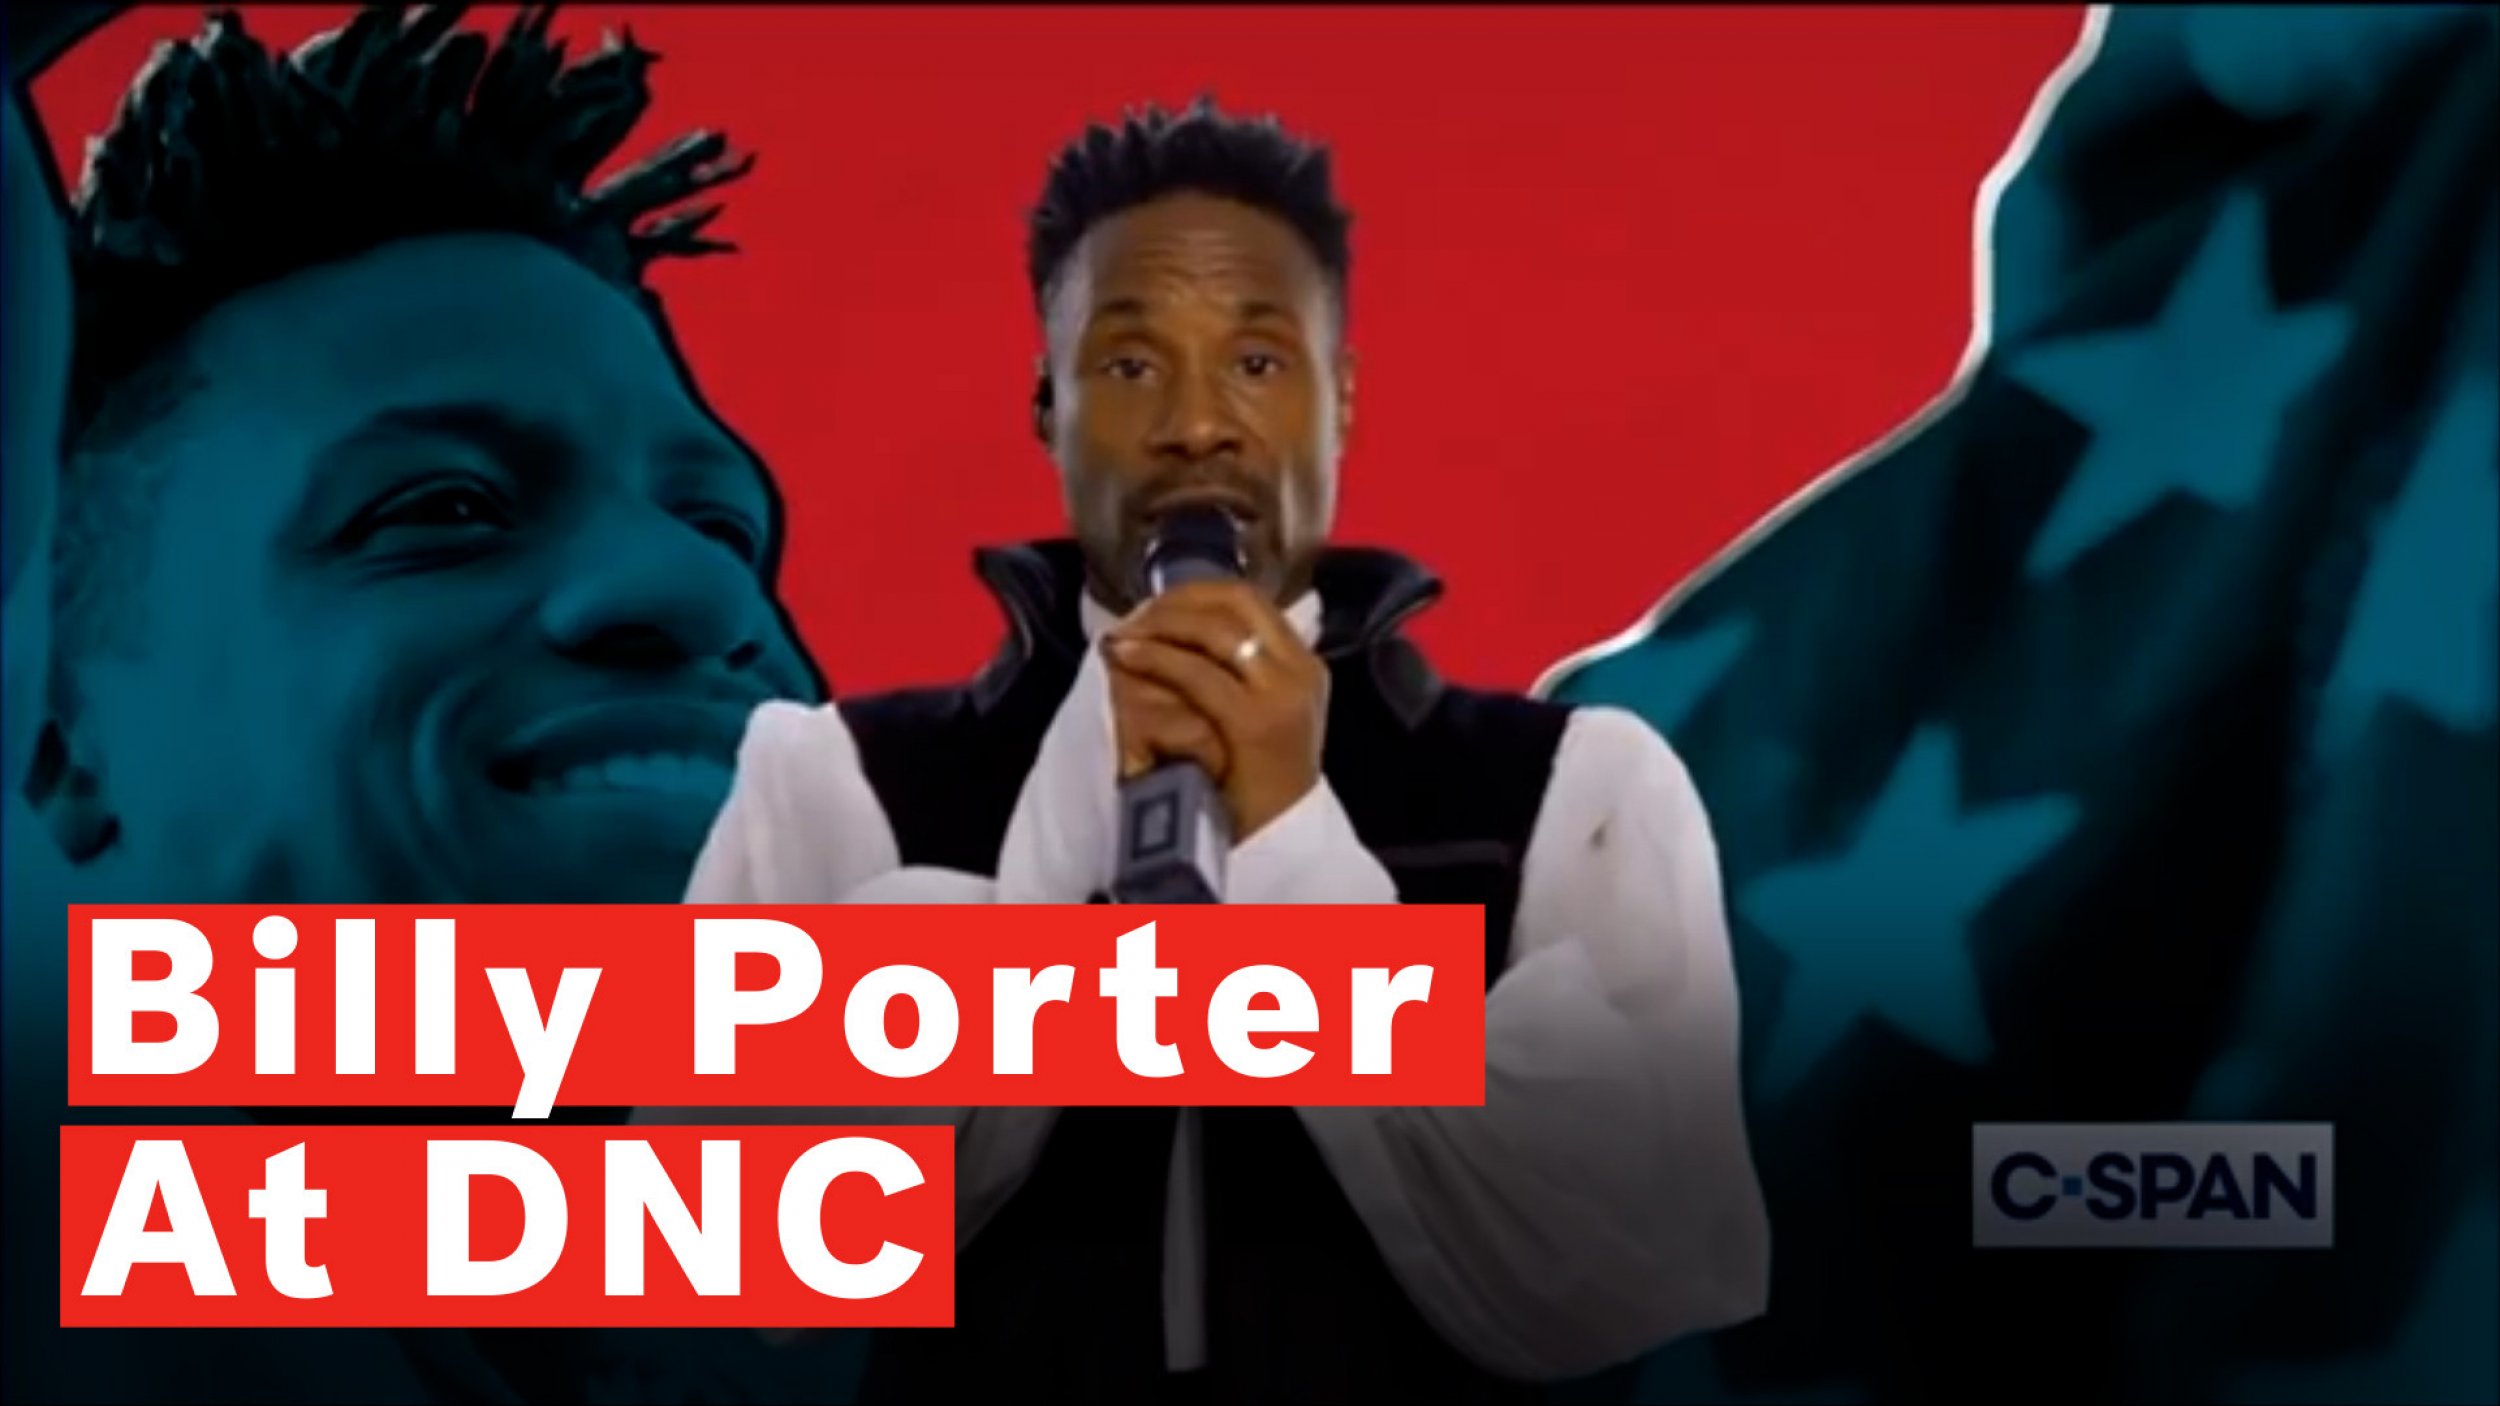 Watch Billy Porters Bizarre DNC 2020 Performance And Twitter Reactions